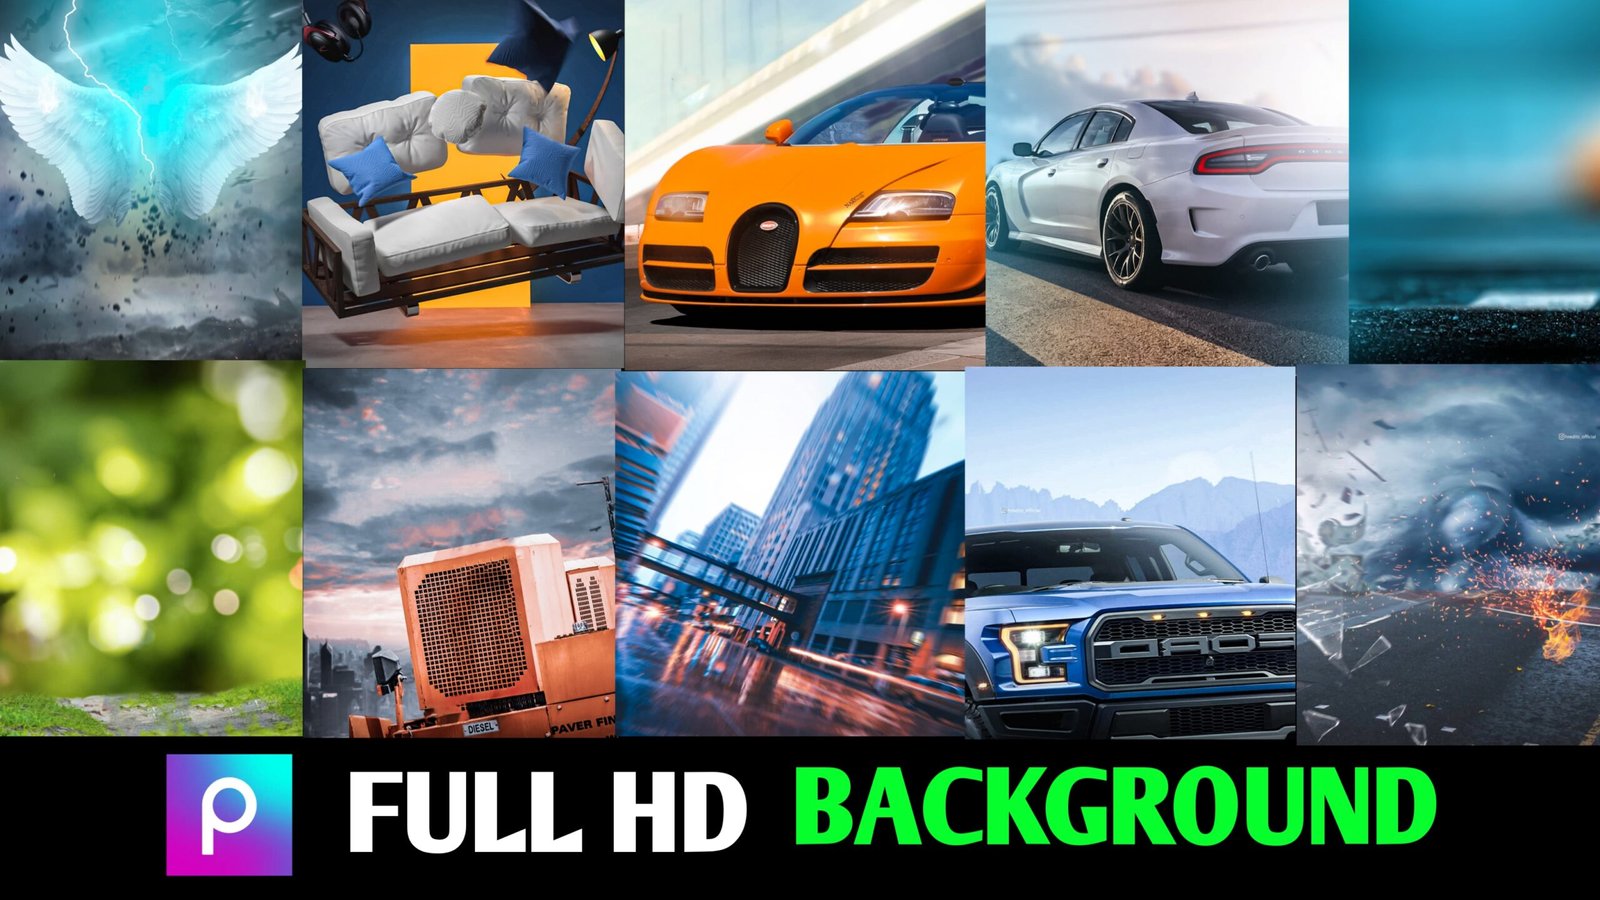 Latest Hd Backgrounds  Latest Full banner blur hd editing backgrounds   Latest CDP backgrounds